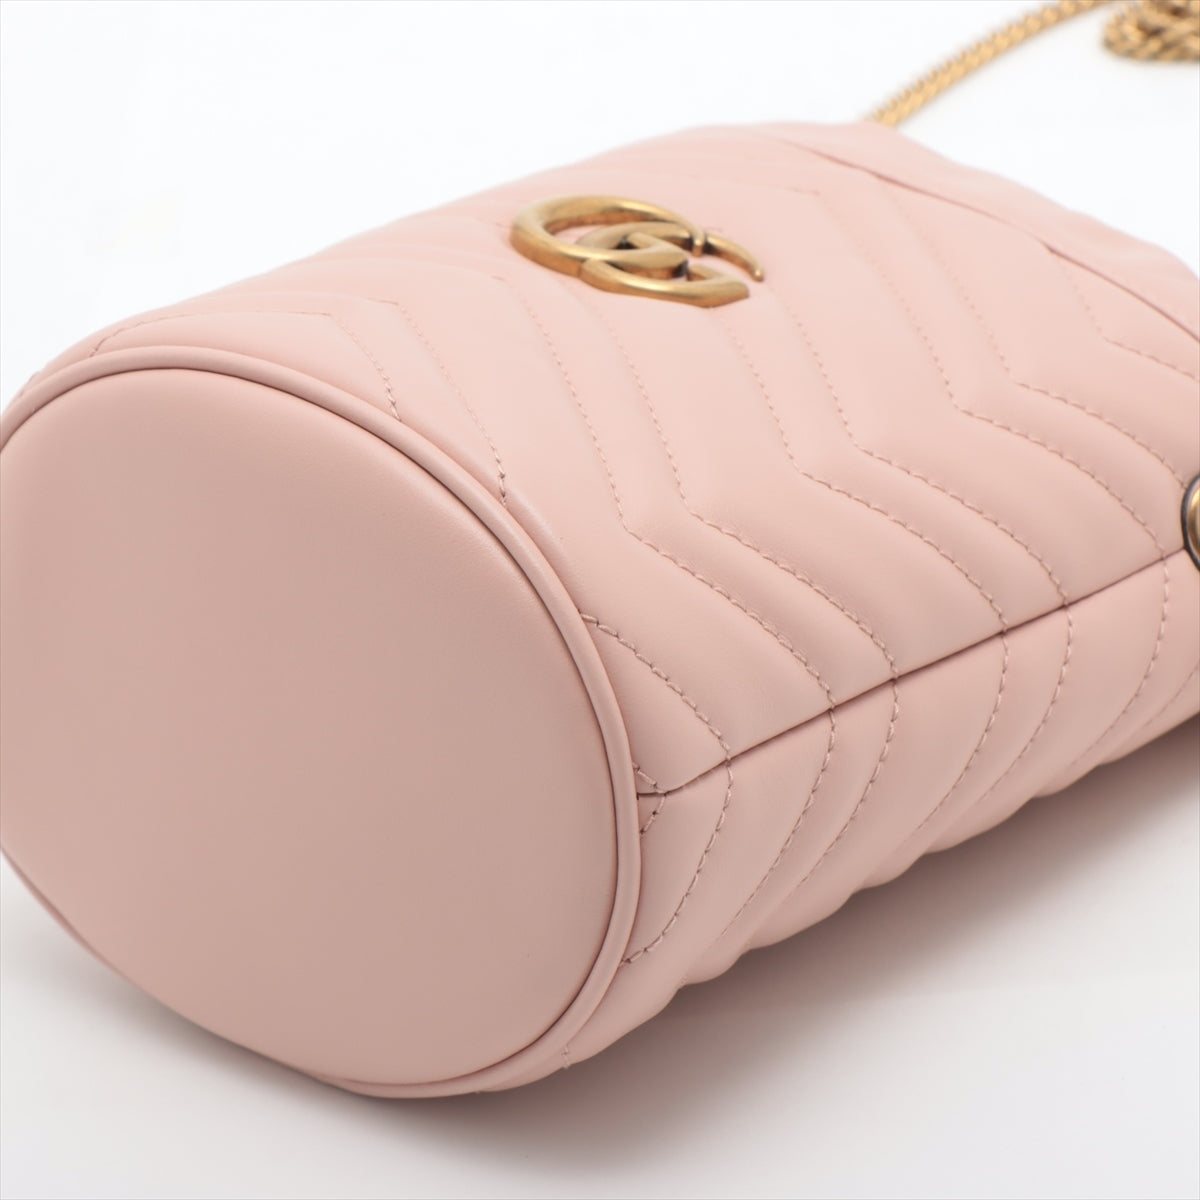 Gucci GG Marmont Leather Chain shoulder bag Pink 575163